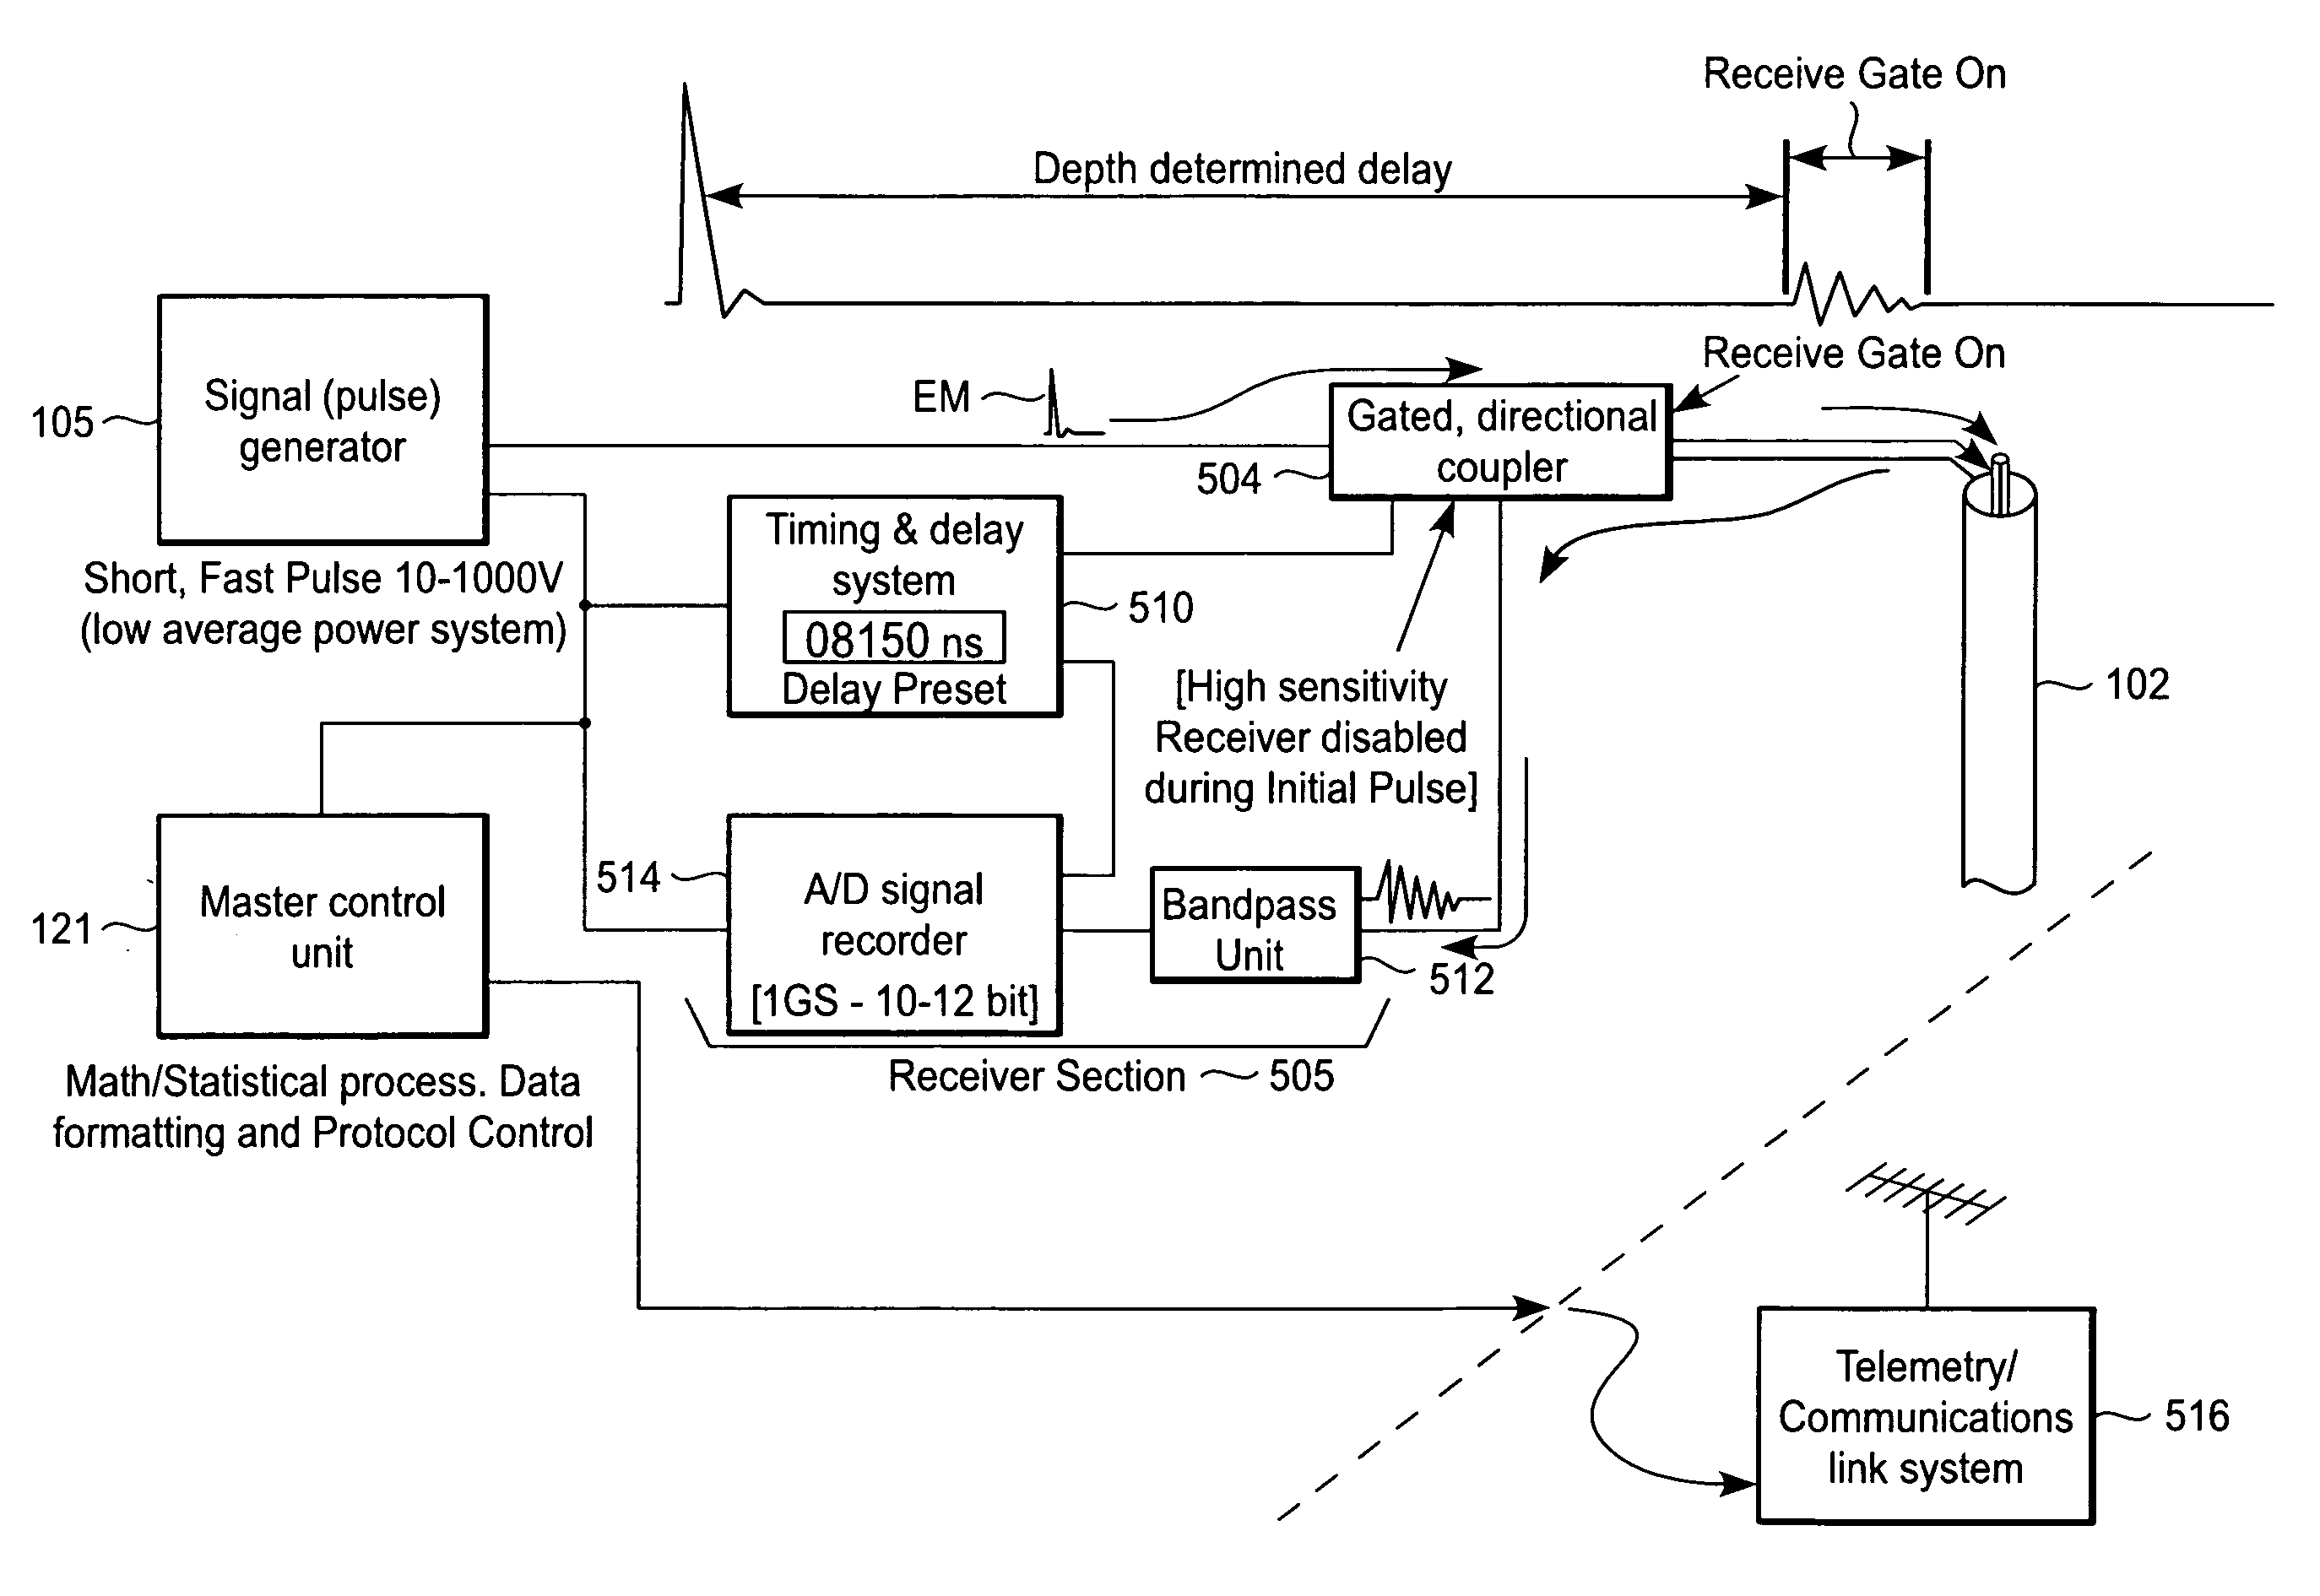 System and method for receiving and decoding electromagnetic transmissions within a well